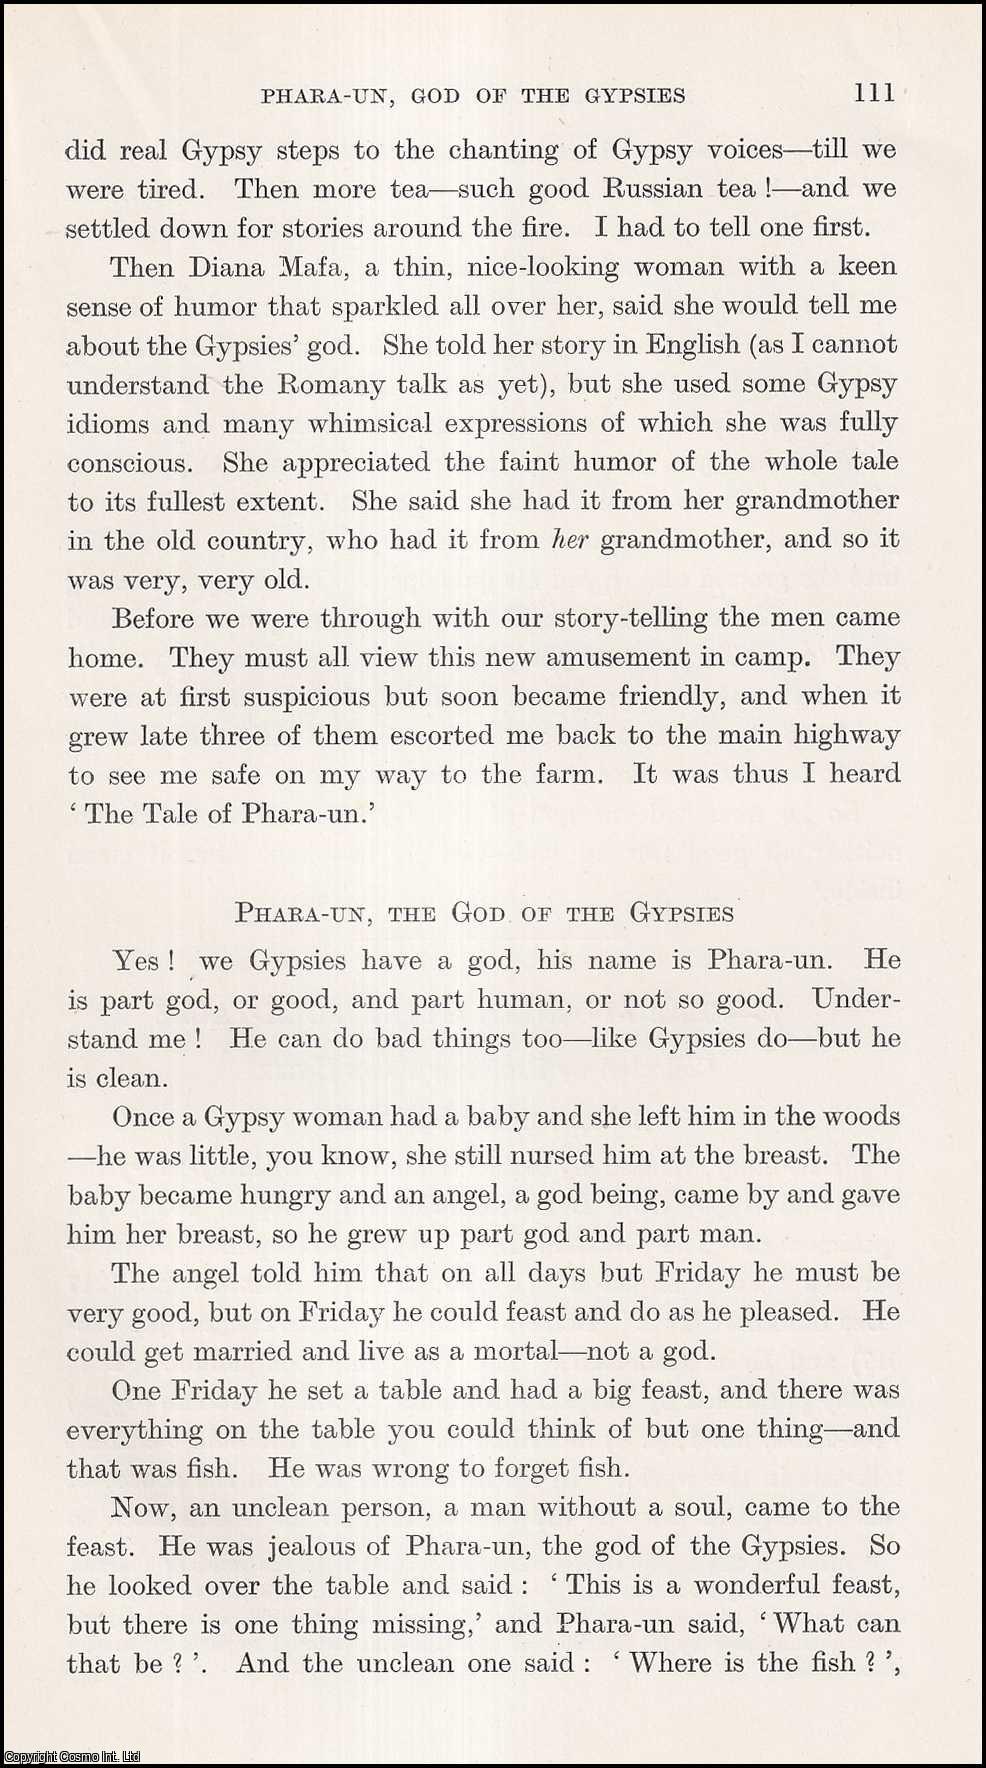 Frances R. Vandercook - Phara-Un, God of the Gypsies; a Tale Recorded from a Russian Gypsy. An uncommon original article from the Journal of the Gypsy Lore Society, 1939.